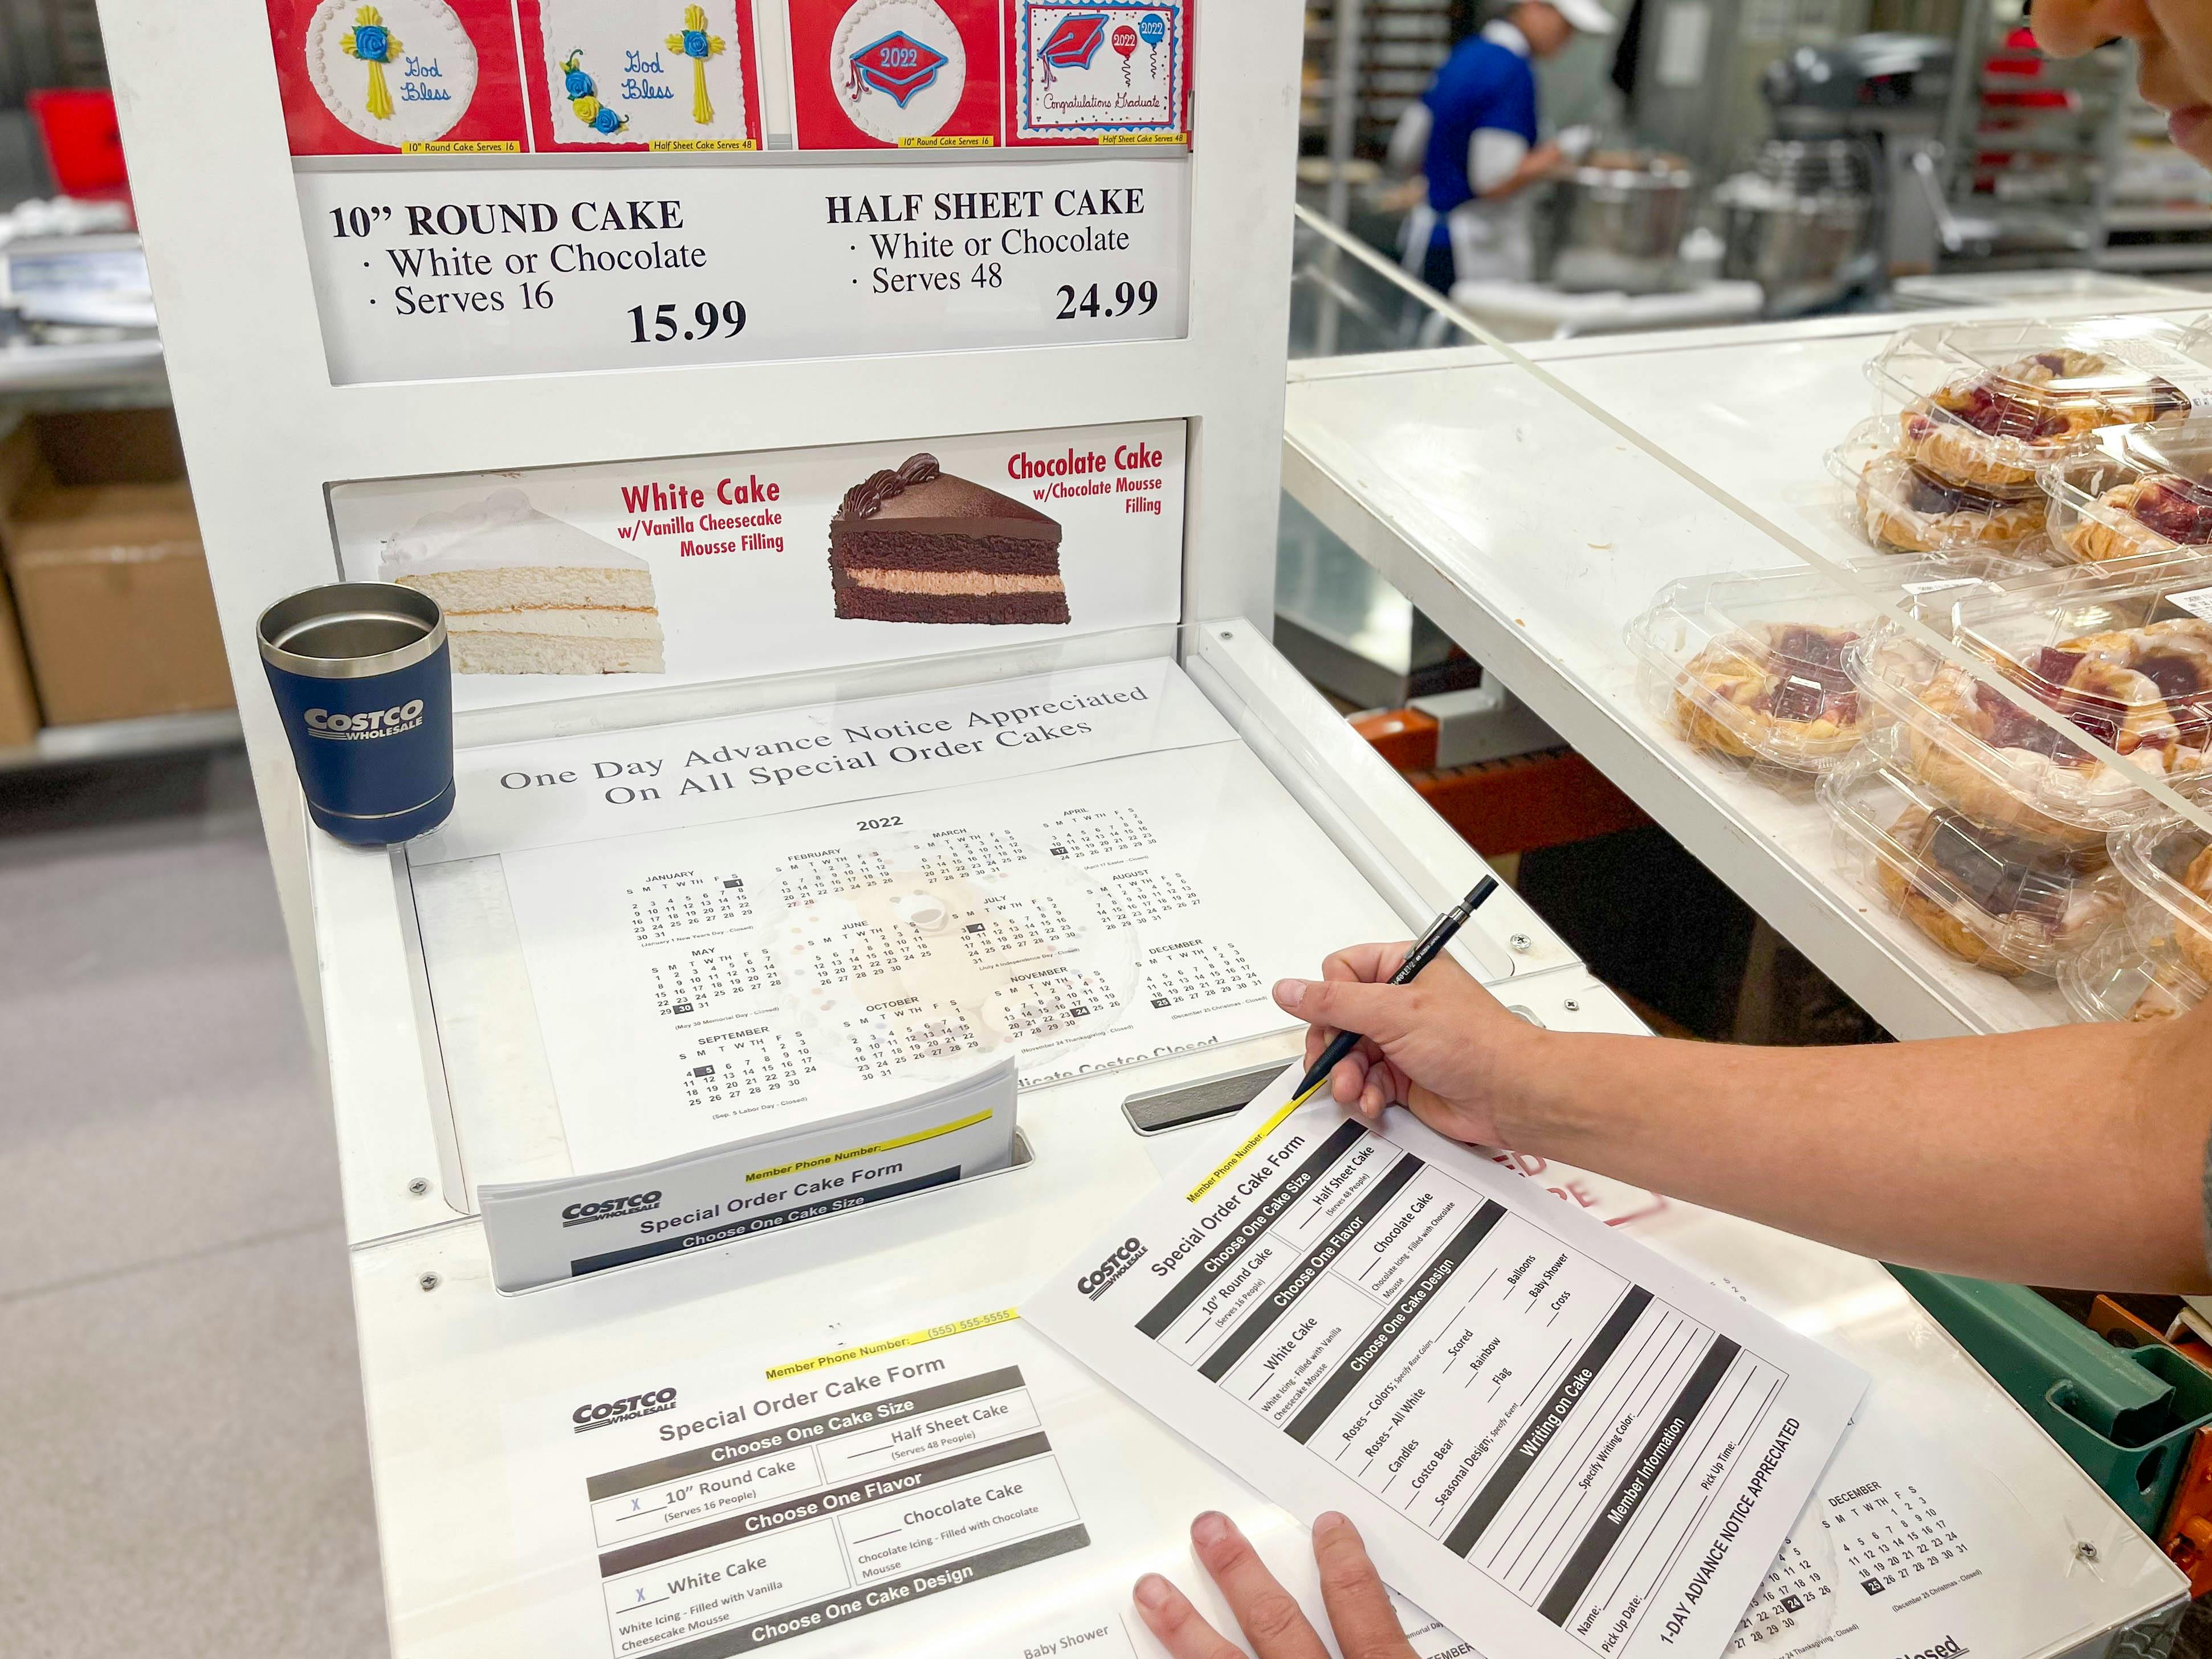 Costco stops selling half-sheet cakes | CNN Business